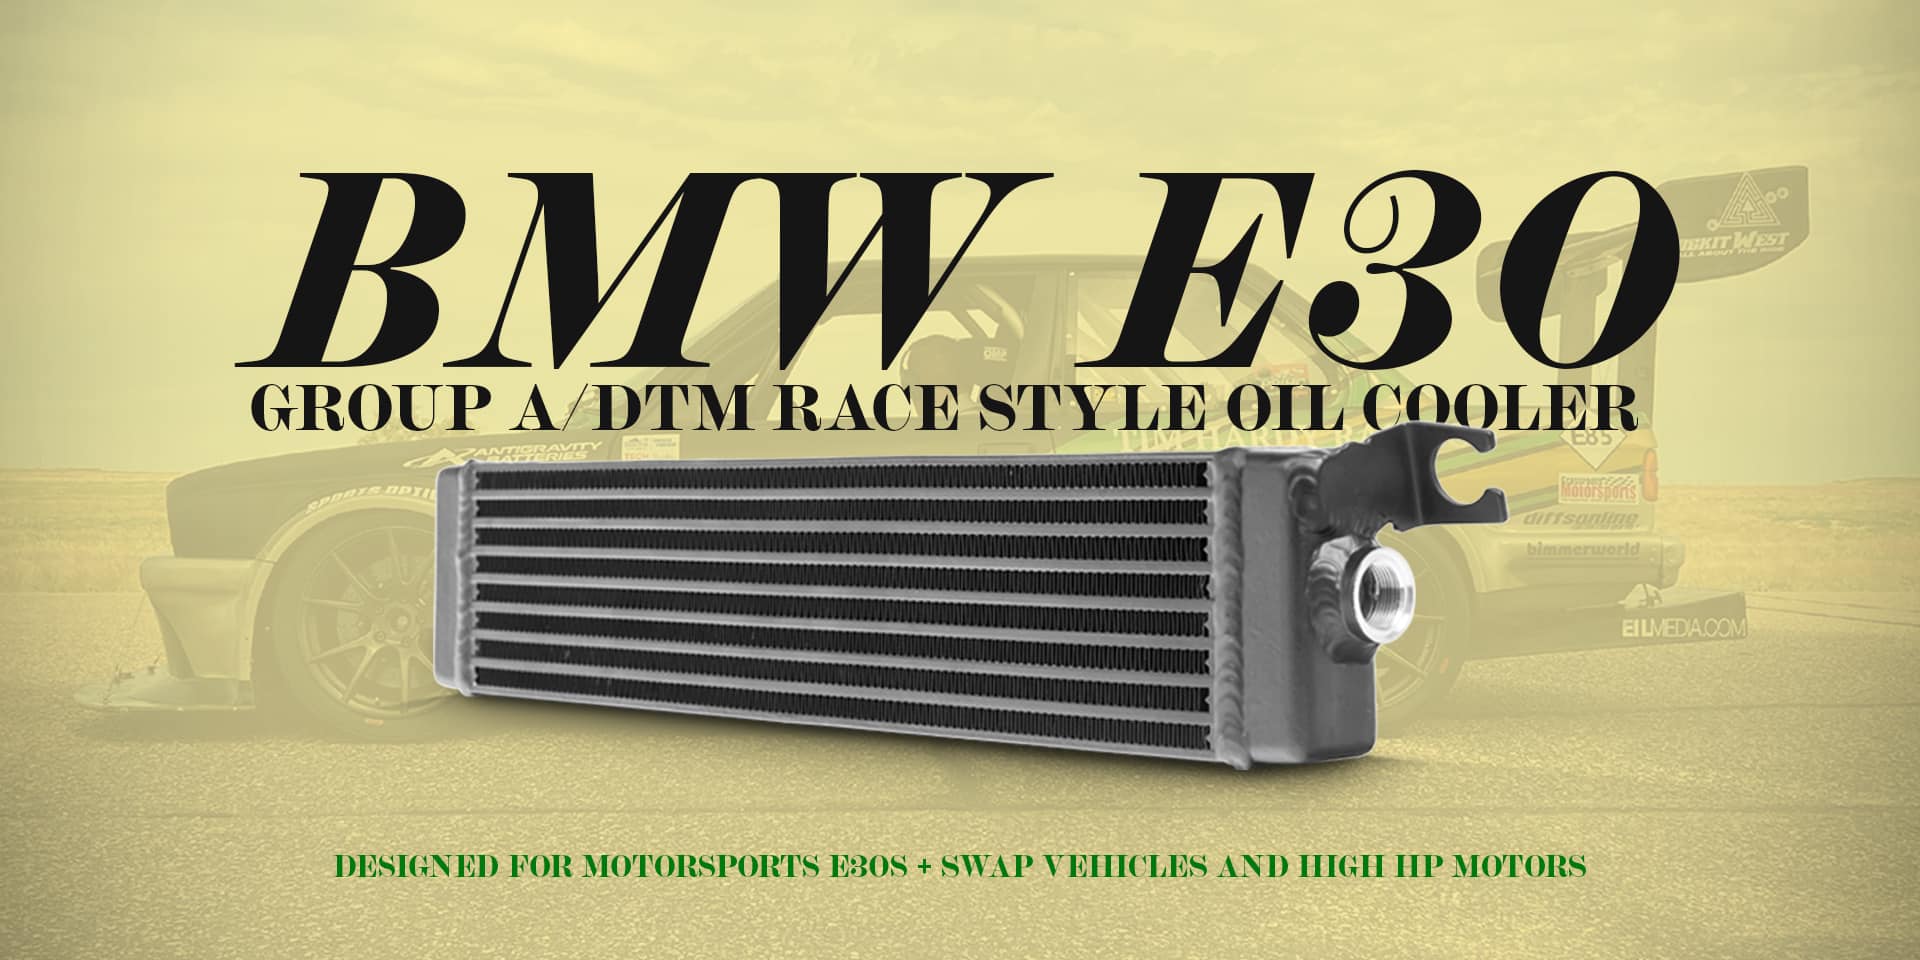 CSF BMW E30 Group A / DTM Race Style Oil Cooler 8218 Home Page